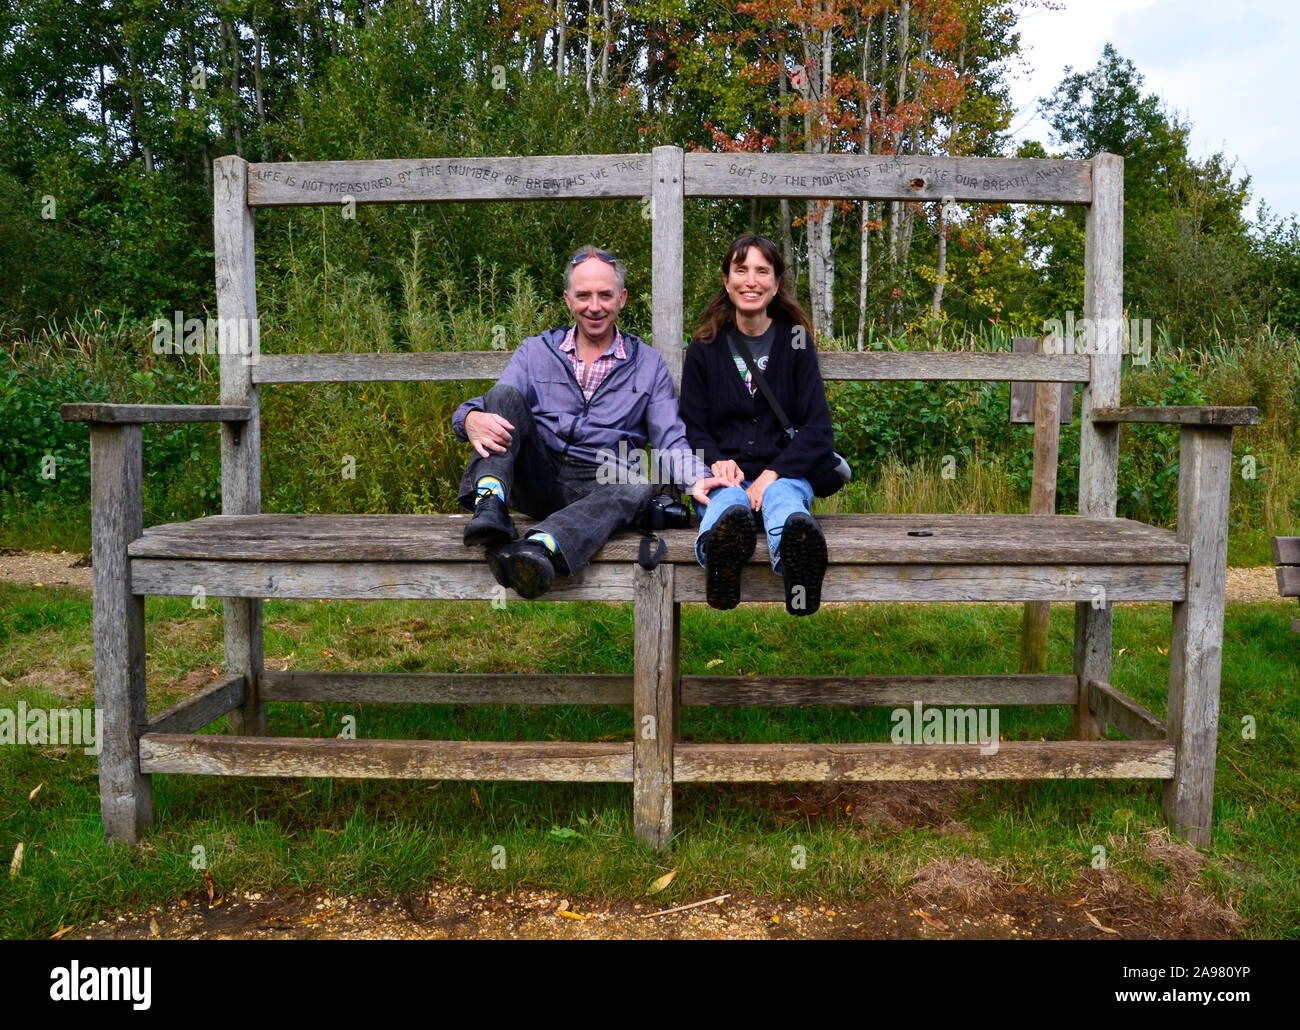 Giant park bench at Lakeside Country Park, Eastleigh, Southampton, Hampshire, UK Stock Photo